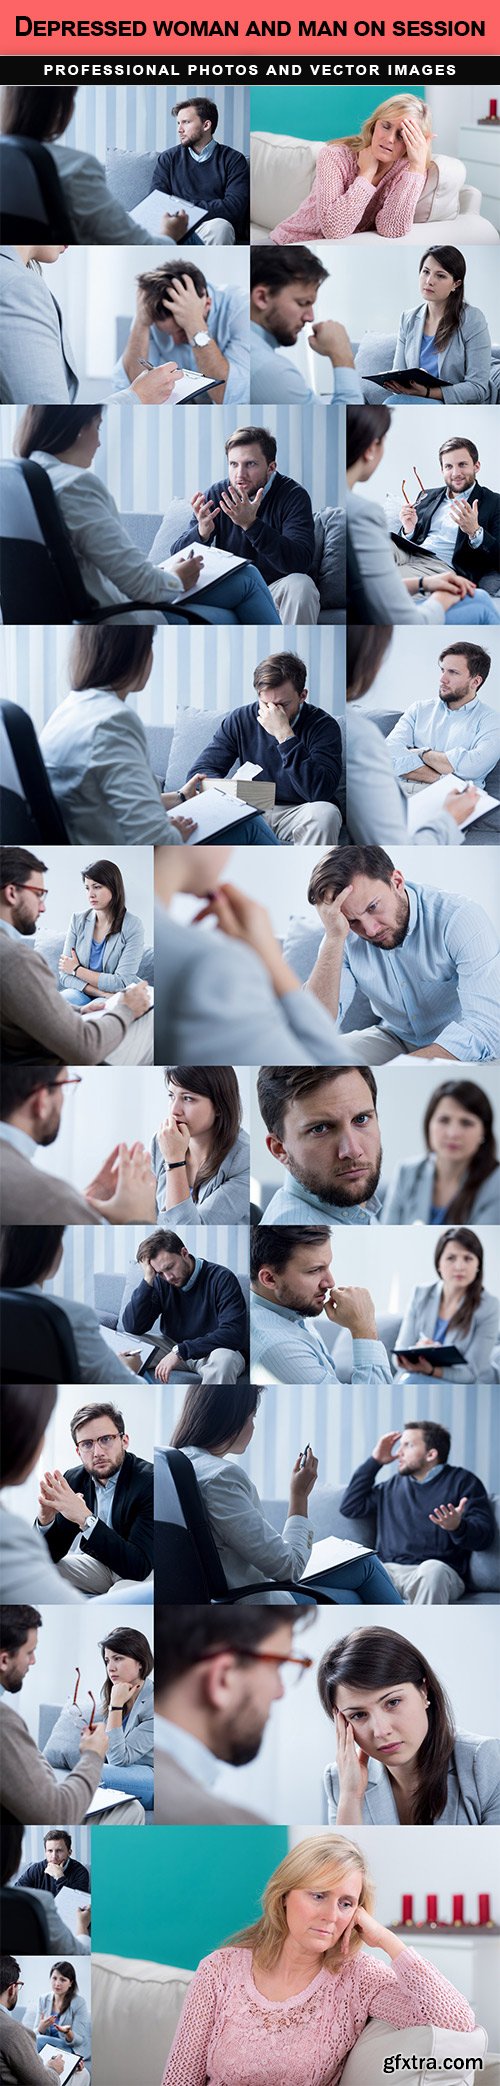 Depressed woman and man on session